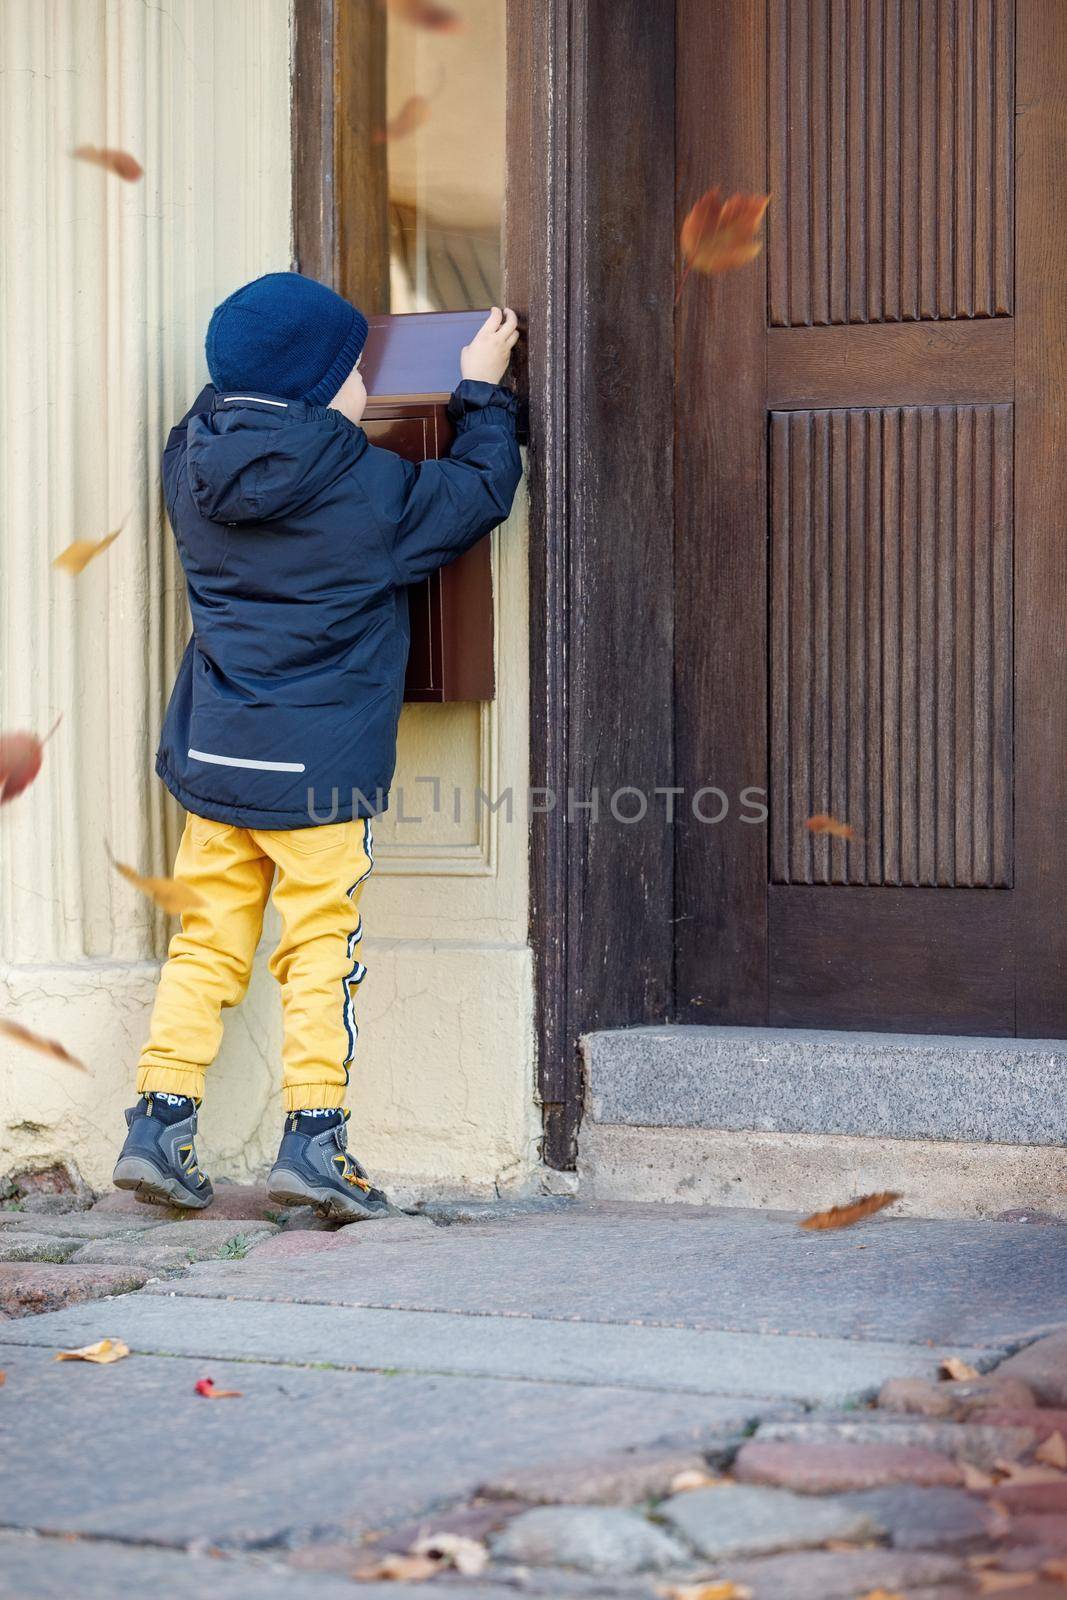 Little boy, checking the mail in outdoors mailbox. The kid is waiting for the letter, checks the correspondence and looks into the metal mailbox. Falling leaves during the autumn season by Lincikas